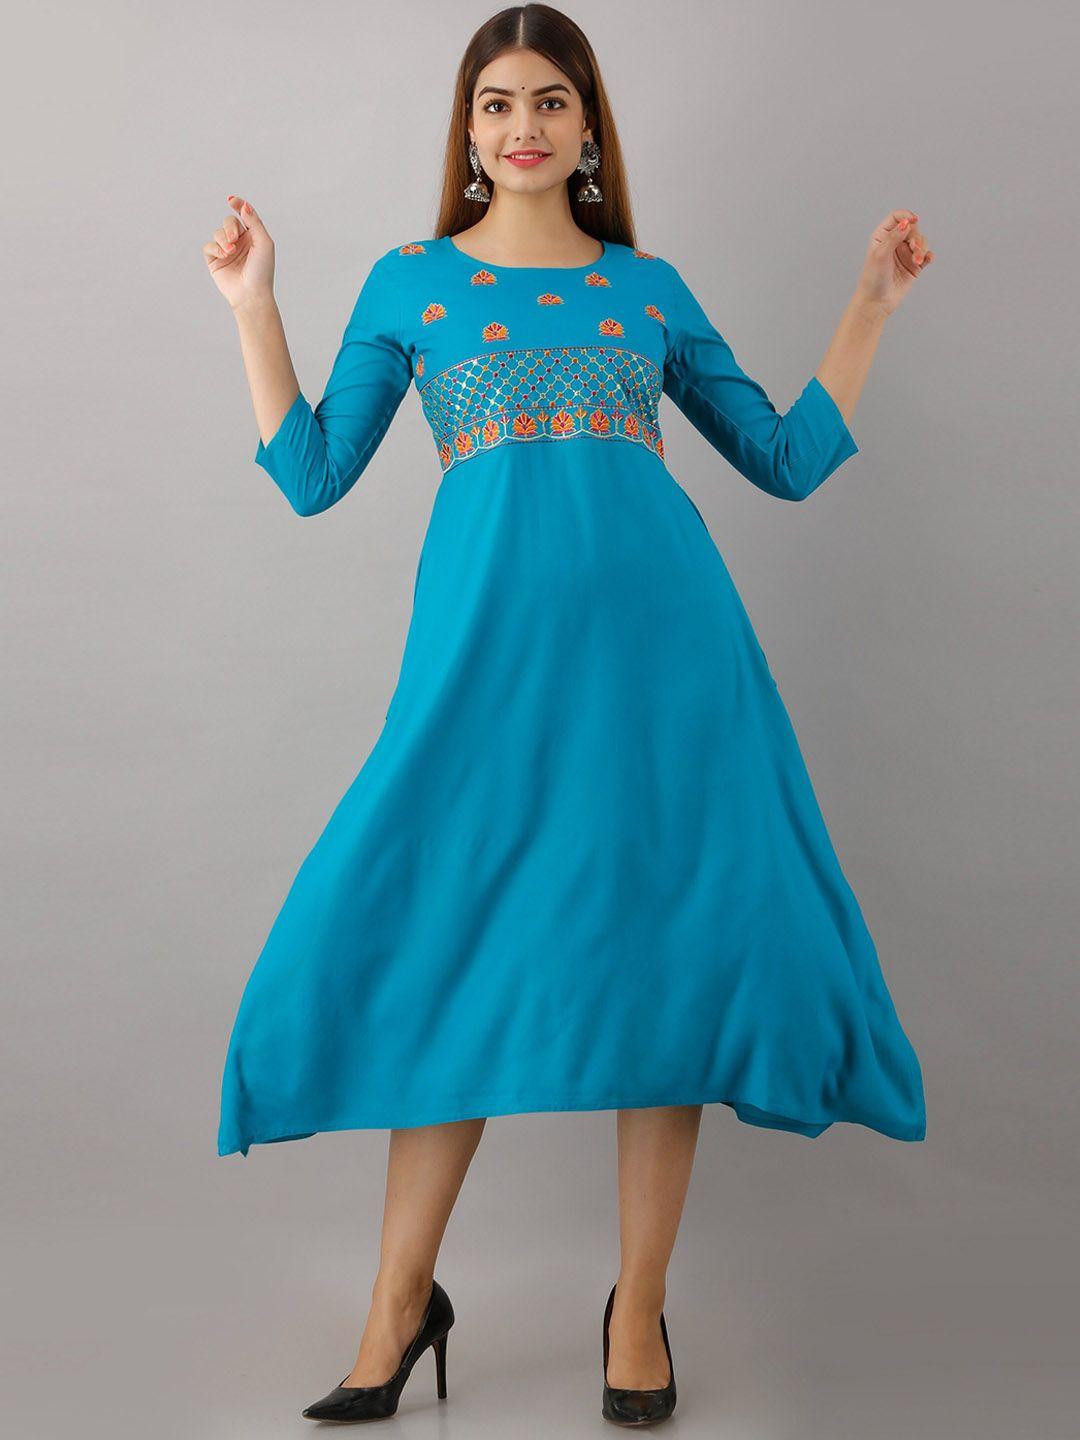 women-touch-teal-blue-&-orange-floral-embroidered-a-line-midi-dress